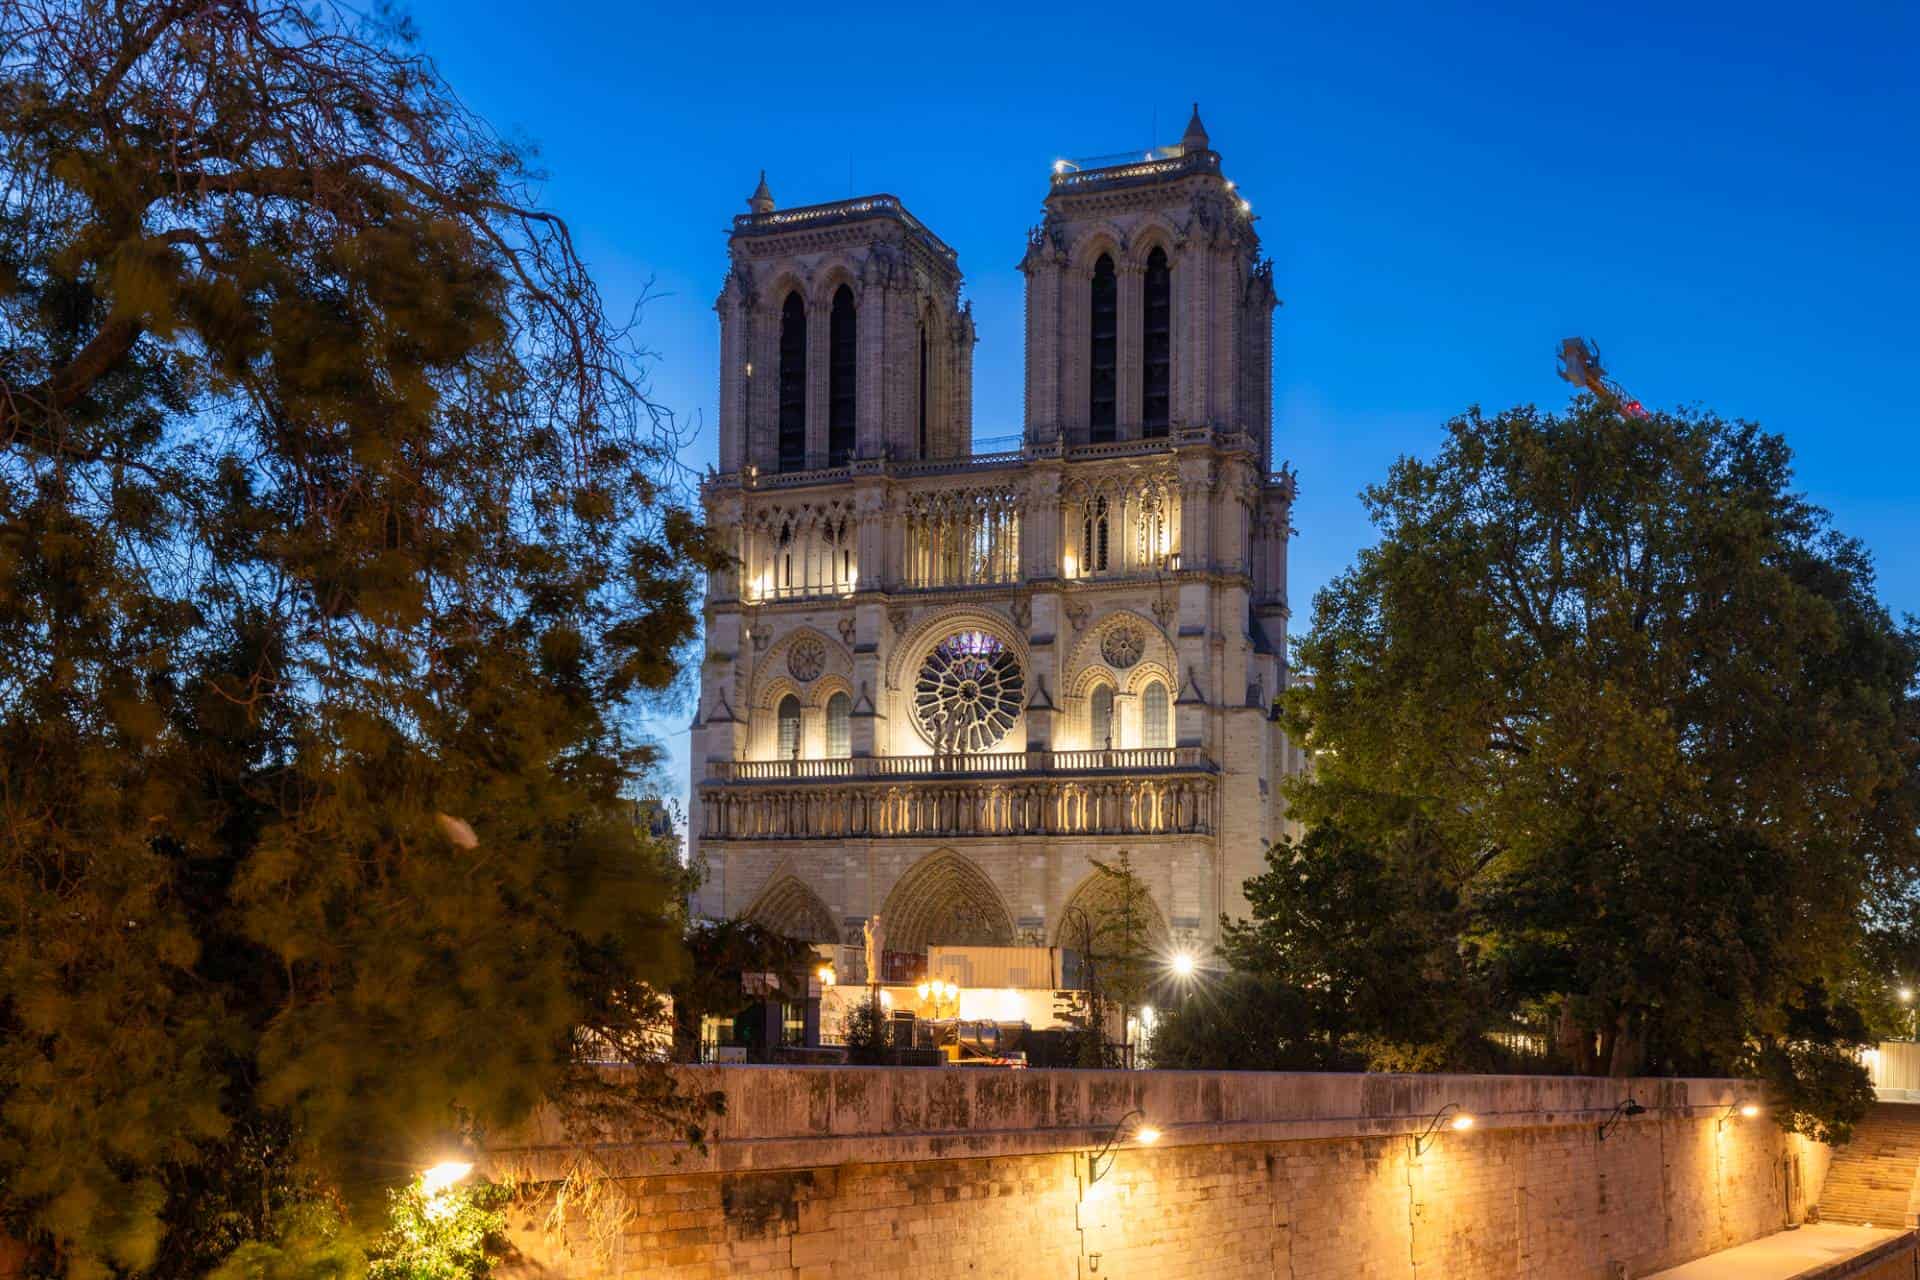 Notre Dame Cathedral, by the Seine River in Paris, France at dawn - the setting of Victor Hugo's novel The Hunchback of Notre Dame.